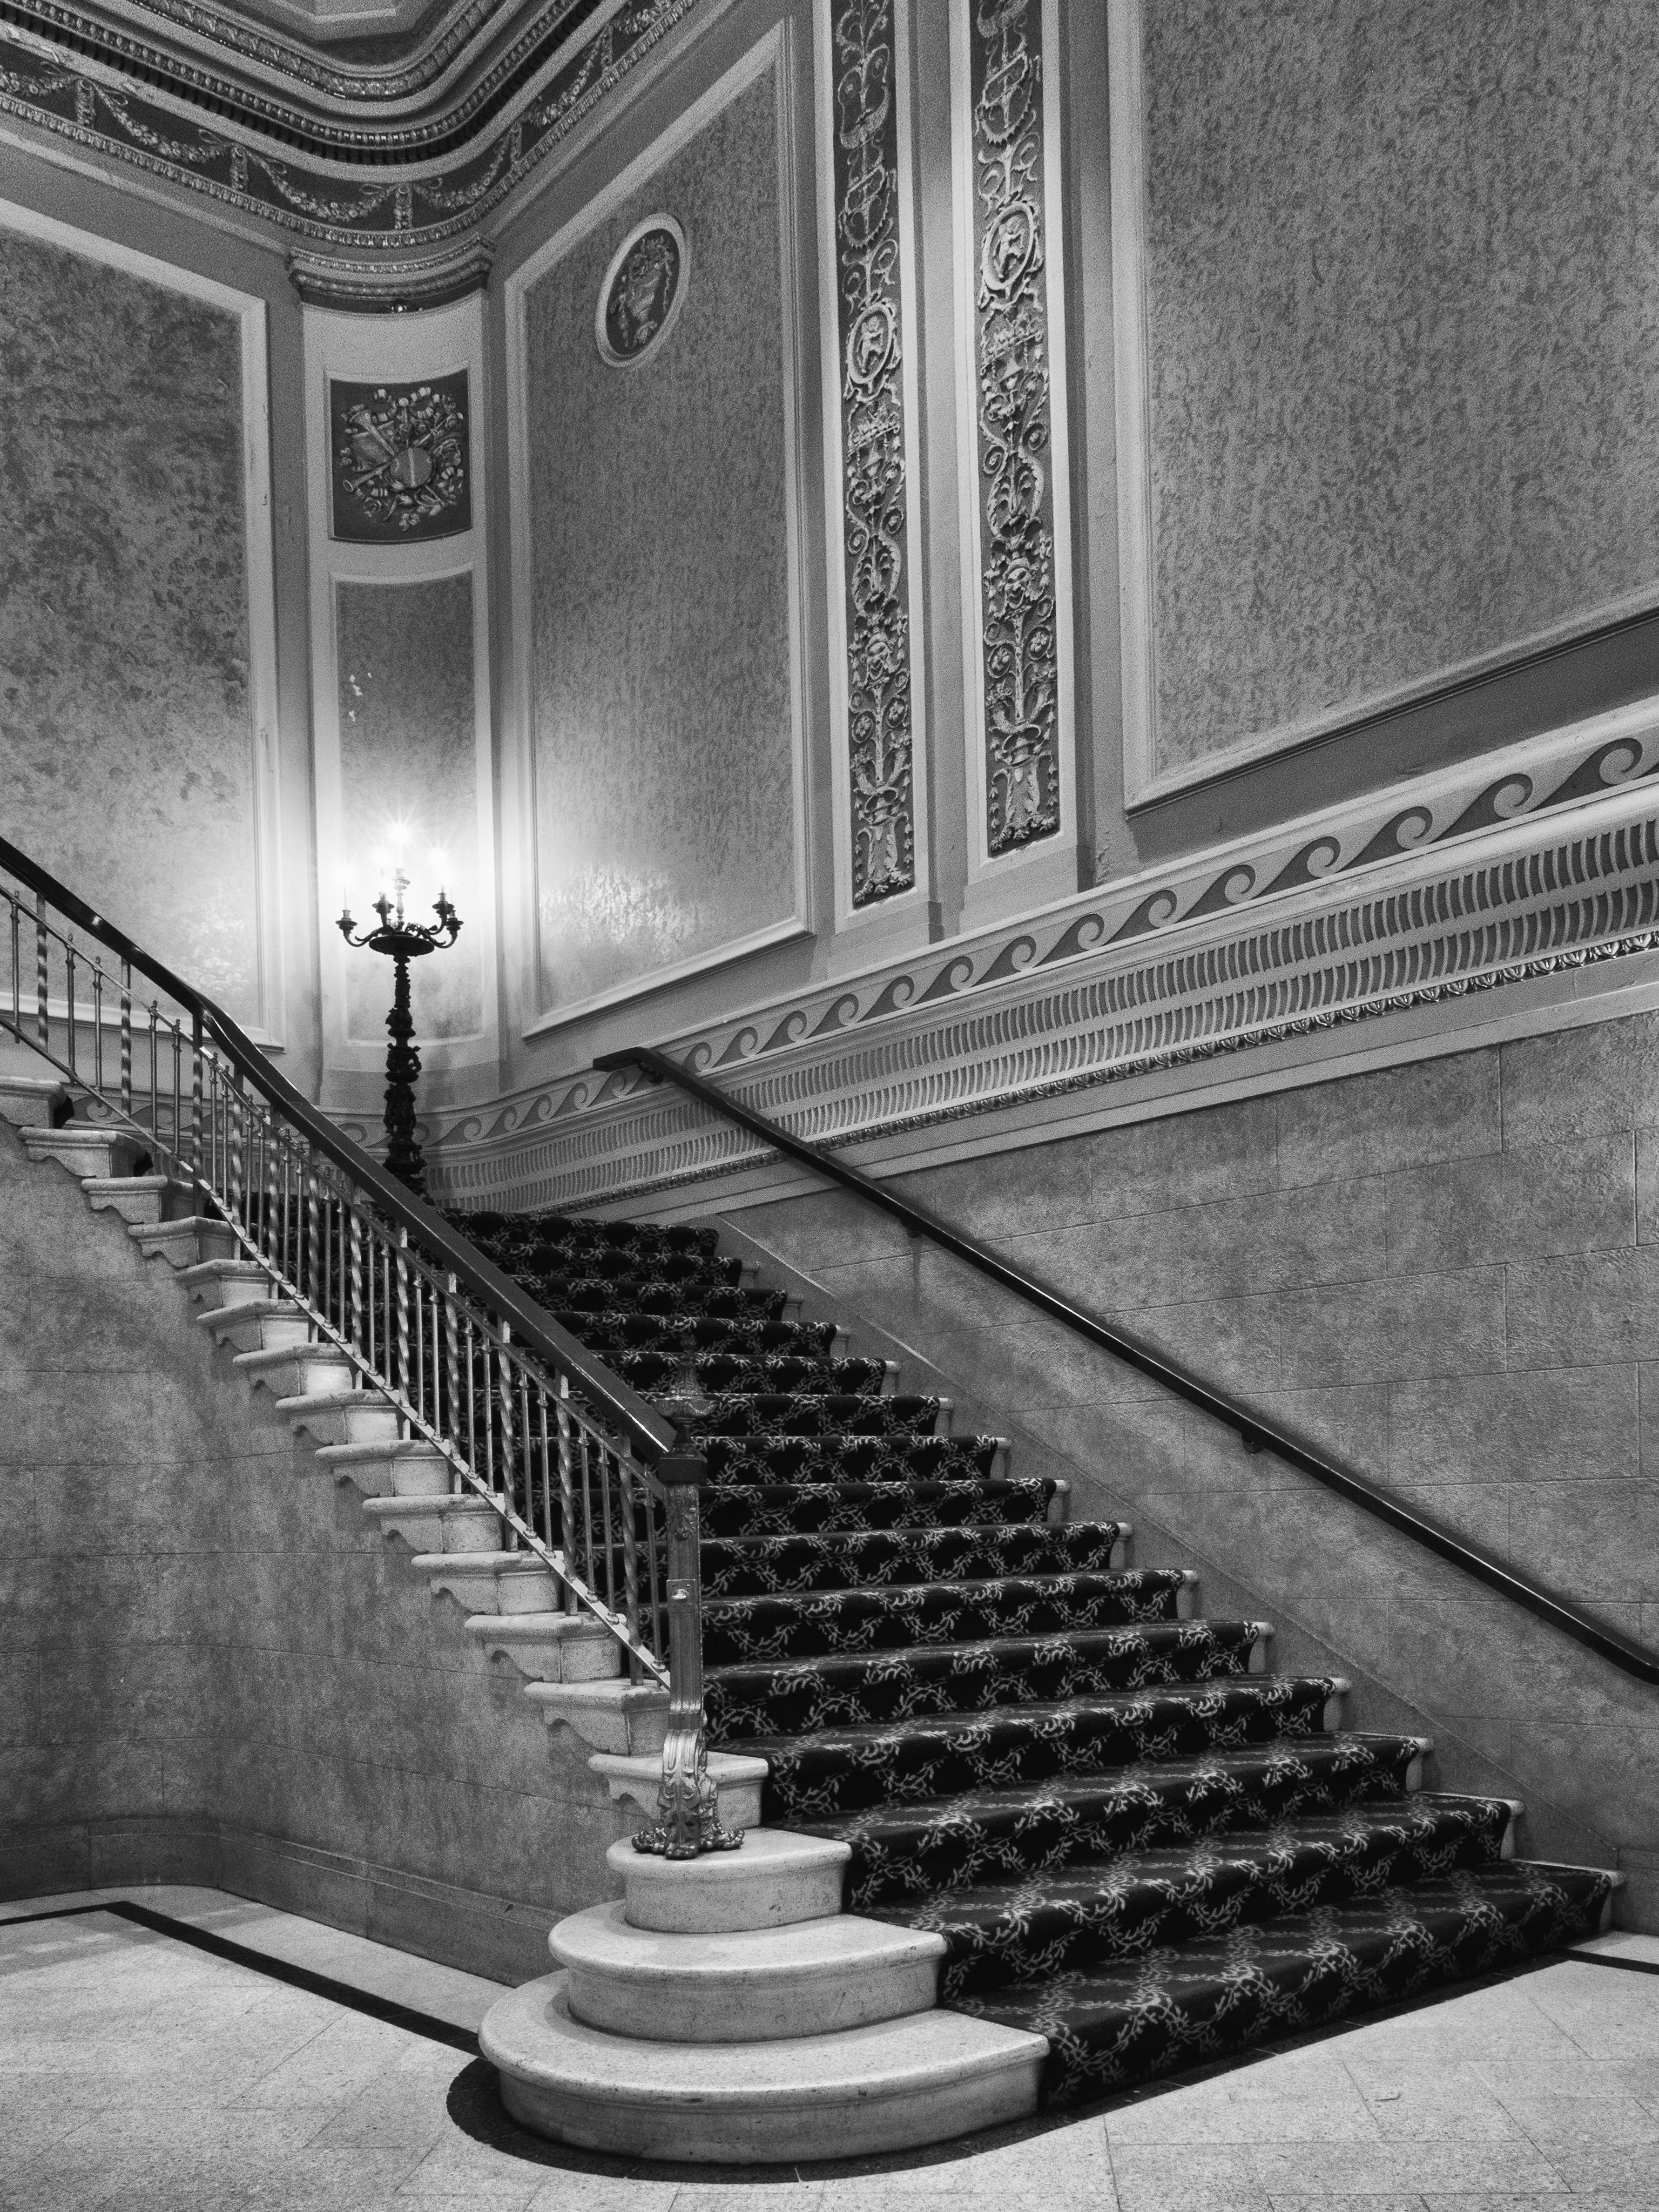 Myrtie Cope Black and White Photograph - "Tivoli Theatre, Grand Staircase" - architectural photography - Ezra Stoller